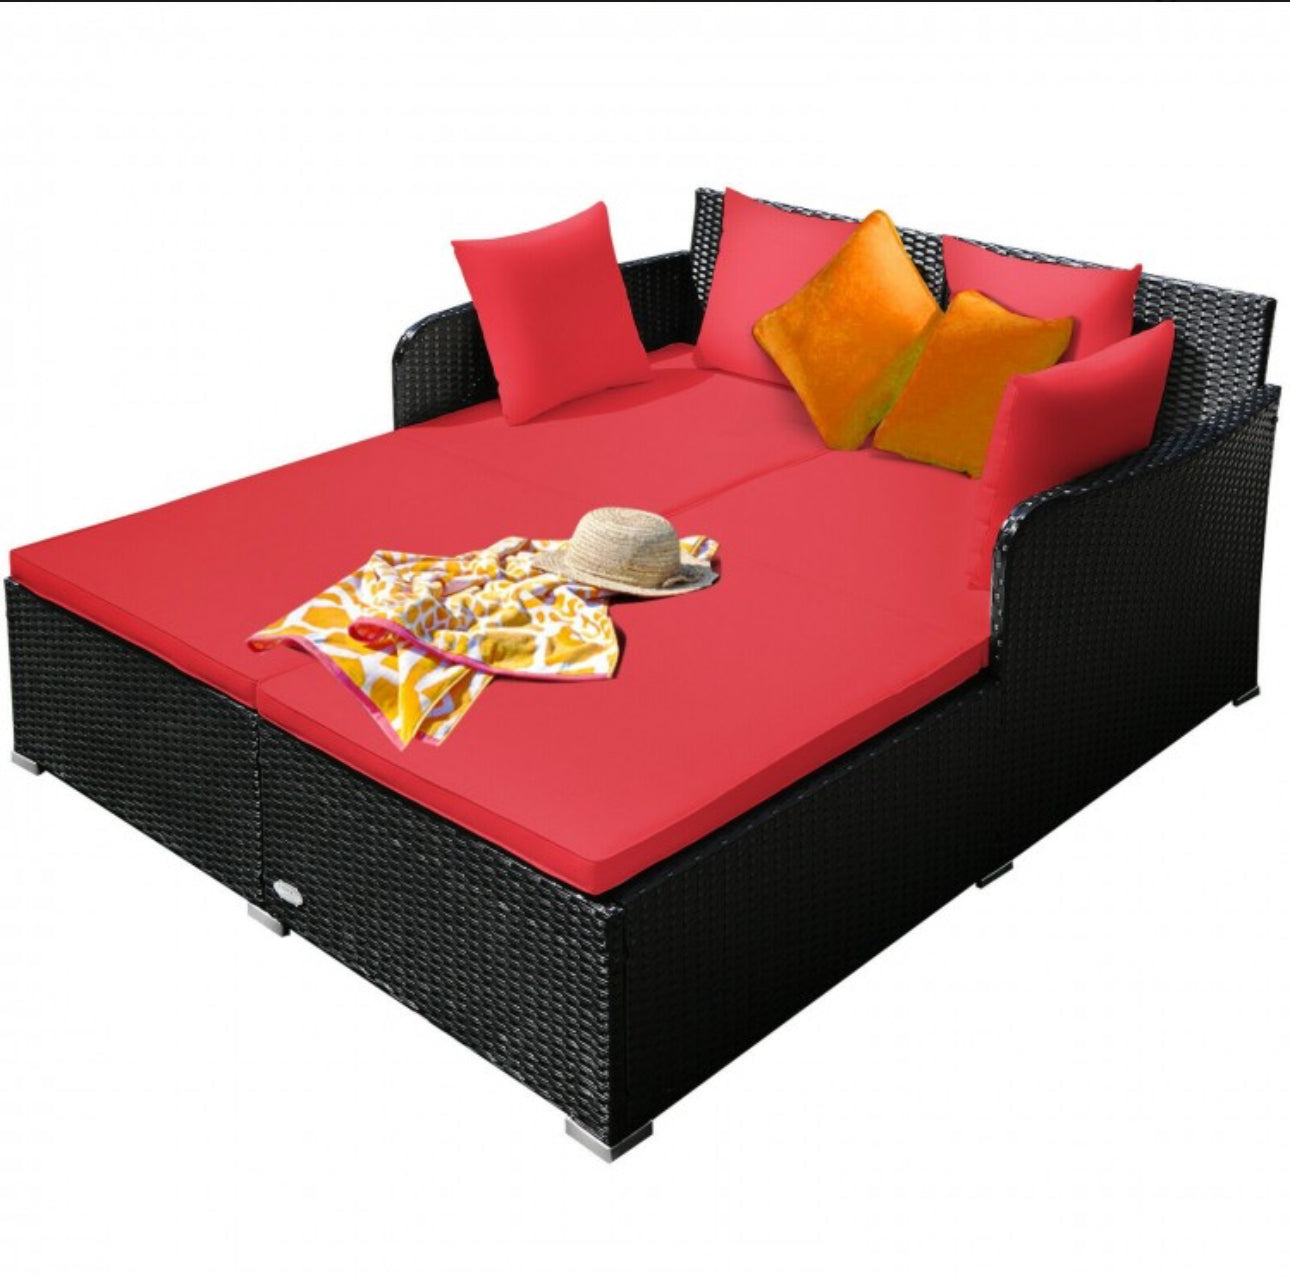 Very Relaxing XXL Spacious Outdoor Rattan Patio Day Bed | Upholstered Extremely Comfortable Cushions, Pillows | Sectional Furniture Set